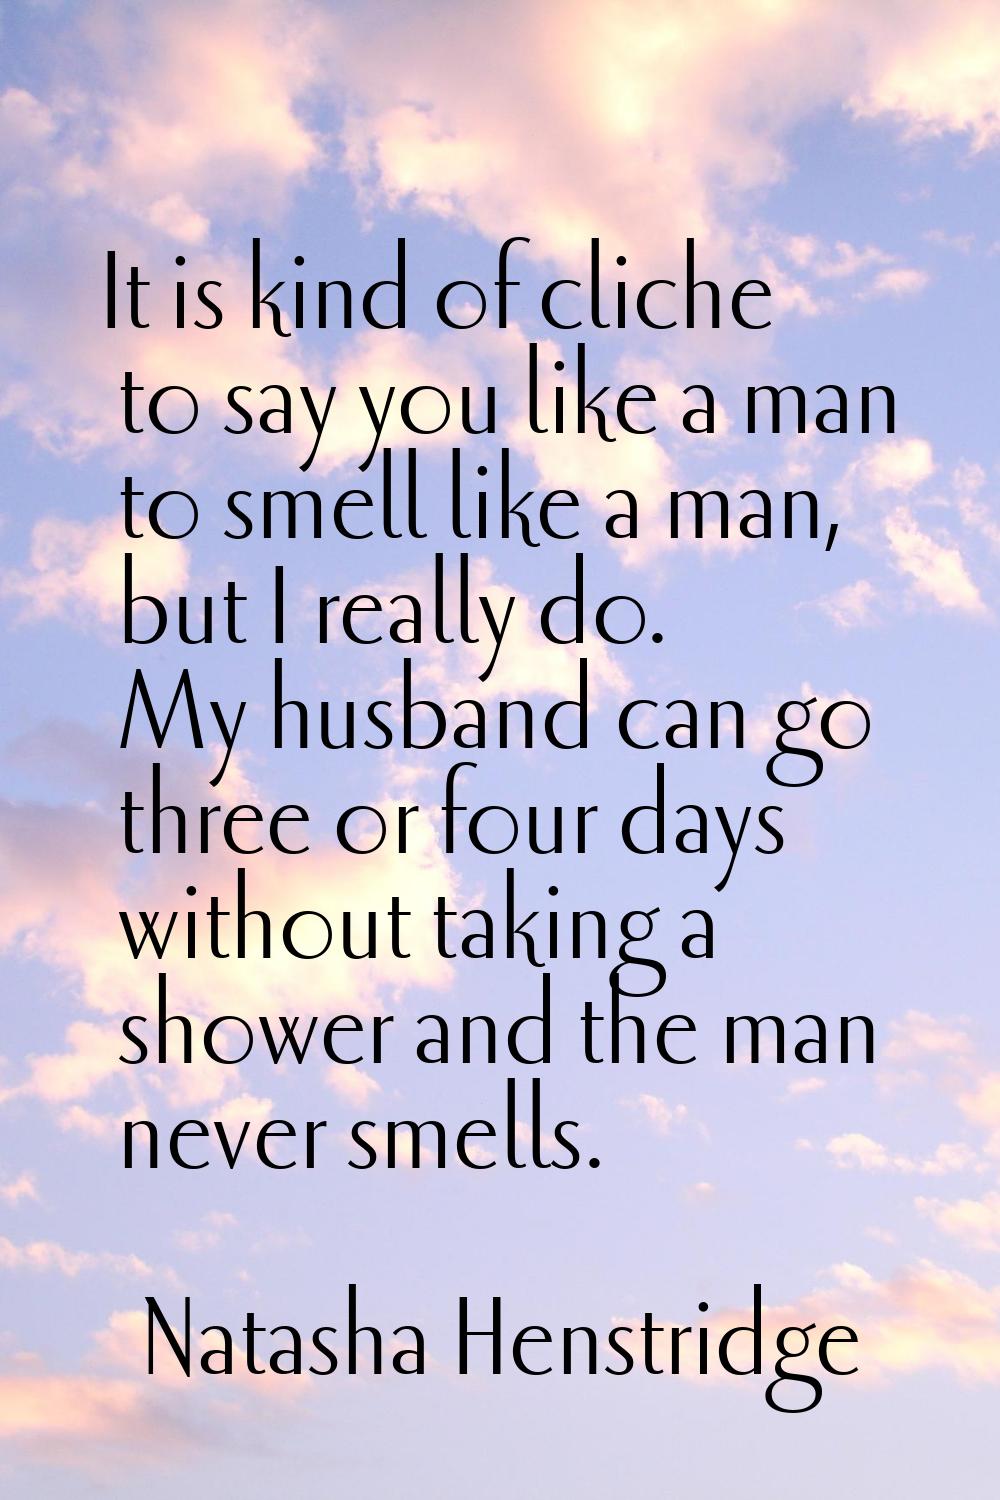 It is kind of cliche to say you like a man to smell like a man, but I really do. My husband can go 